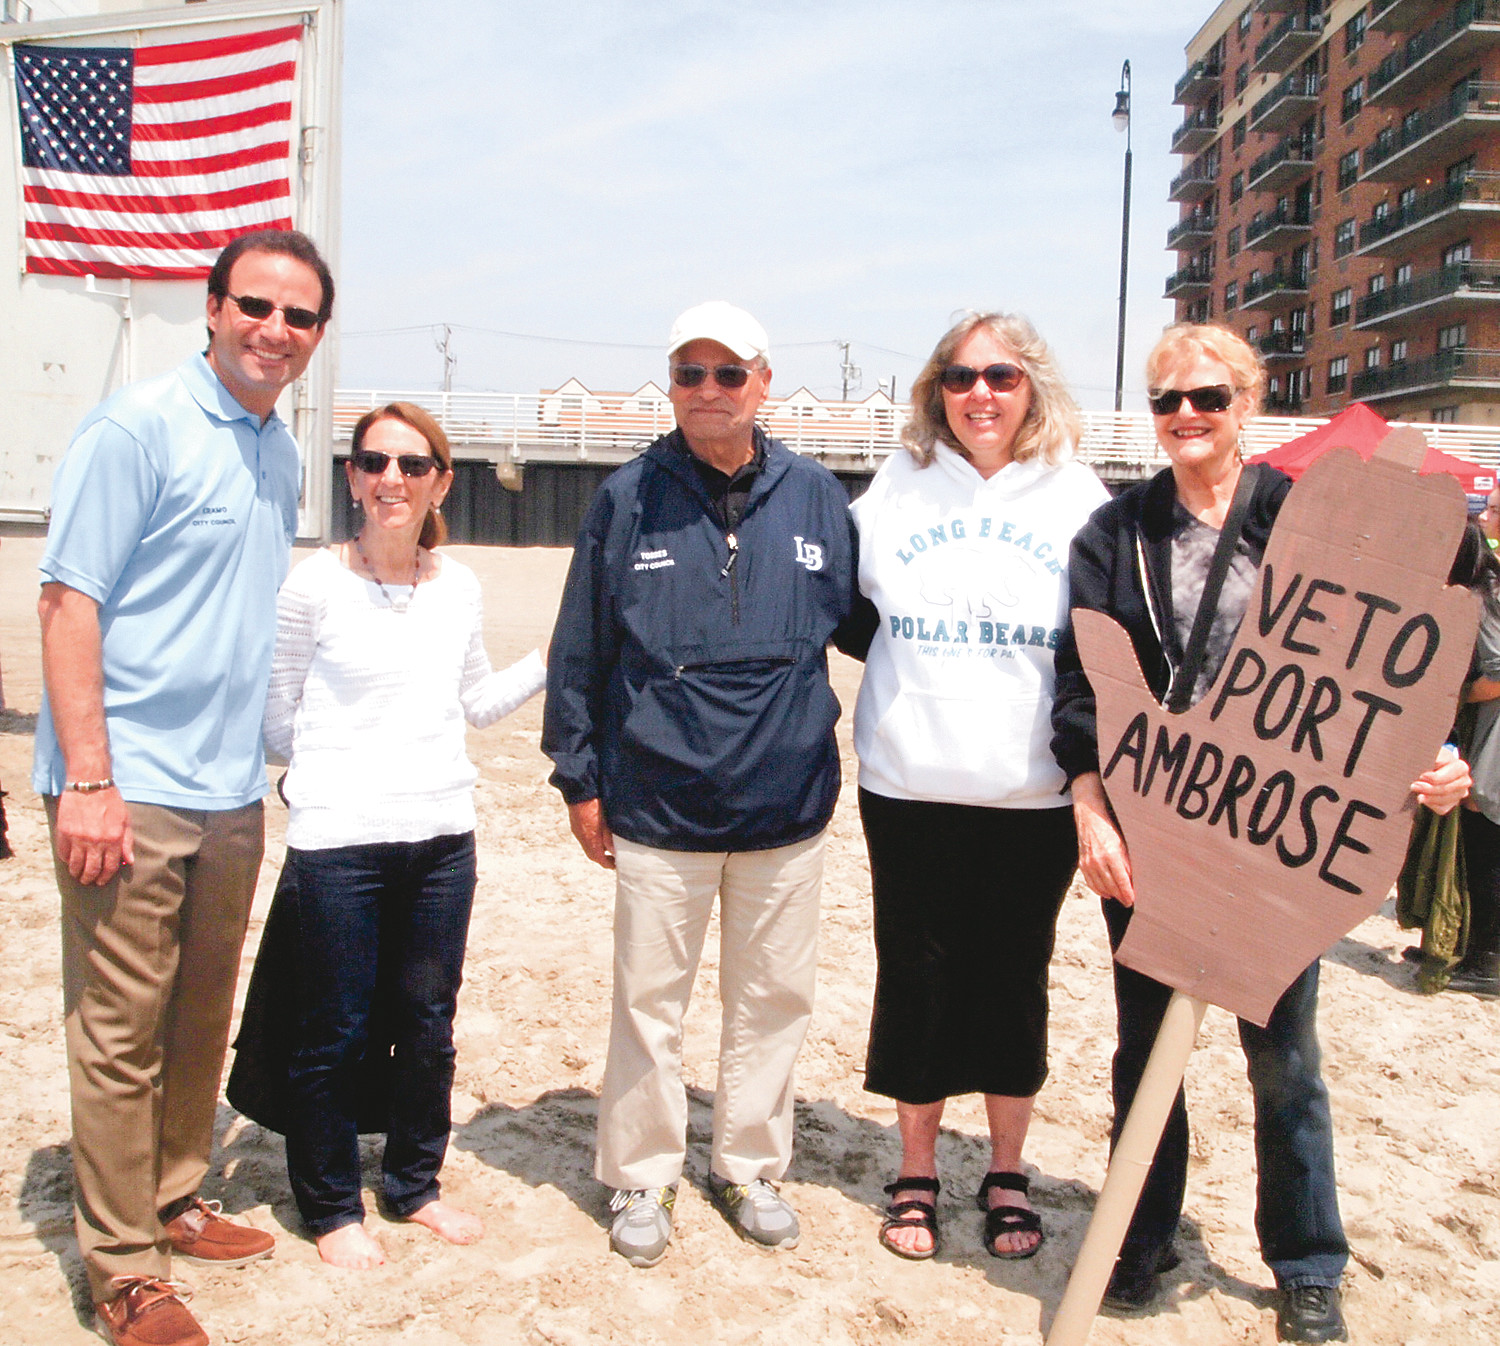 City Council member Anthony Eramo, left, Council Vice President Fran Adelson, Council President Len Torres, County Legislator Denise Ford and Johanna Mathieson or Artists-in-Partnership, Inc. protested the proposed LNG facility. 